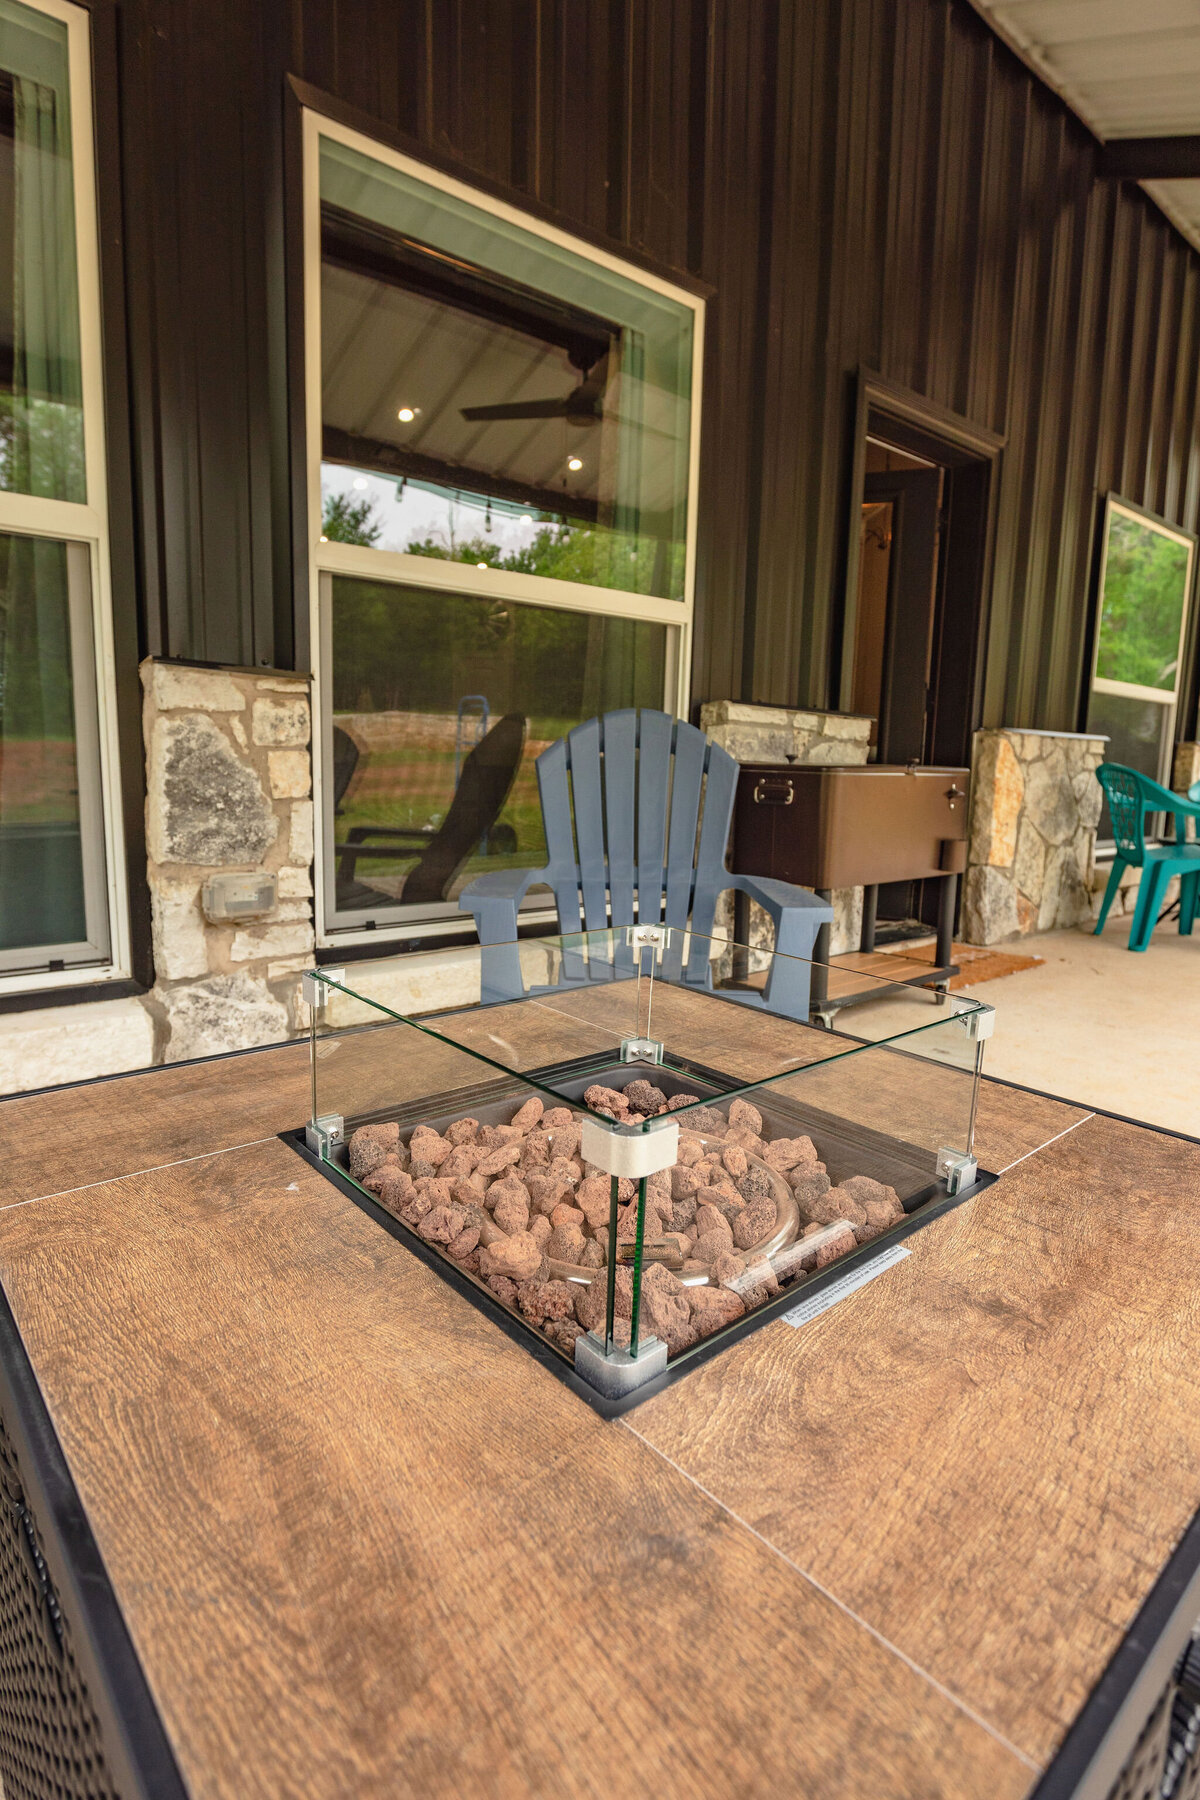 Outdoor patio with firepit and plenty of seating at this five-bedroom, 3-bathroom vacation rental house for up to 10 guests with free wifi, private parking, outdoor games and seating, and bbq grill on 2 acres of land near Waco, TX.